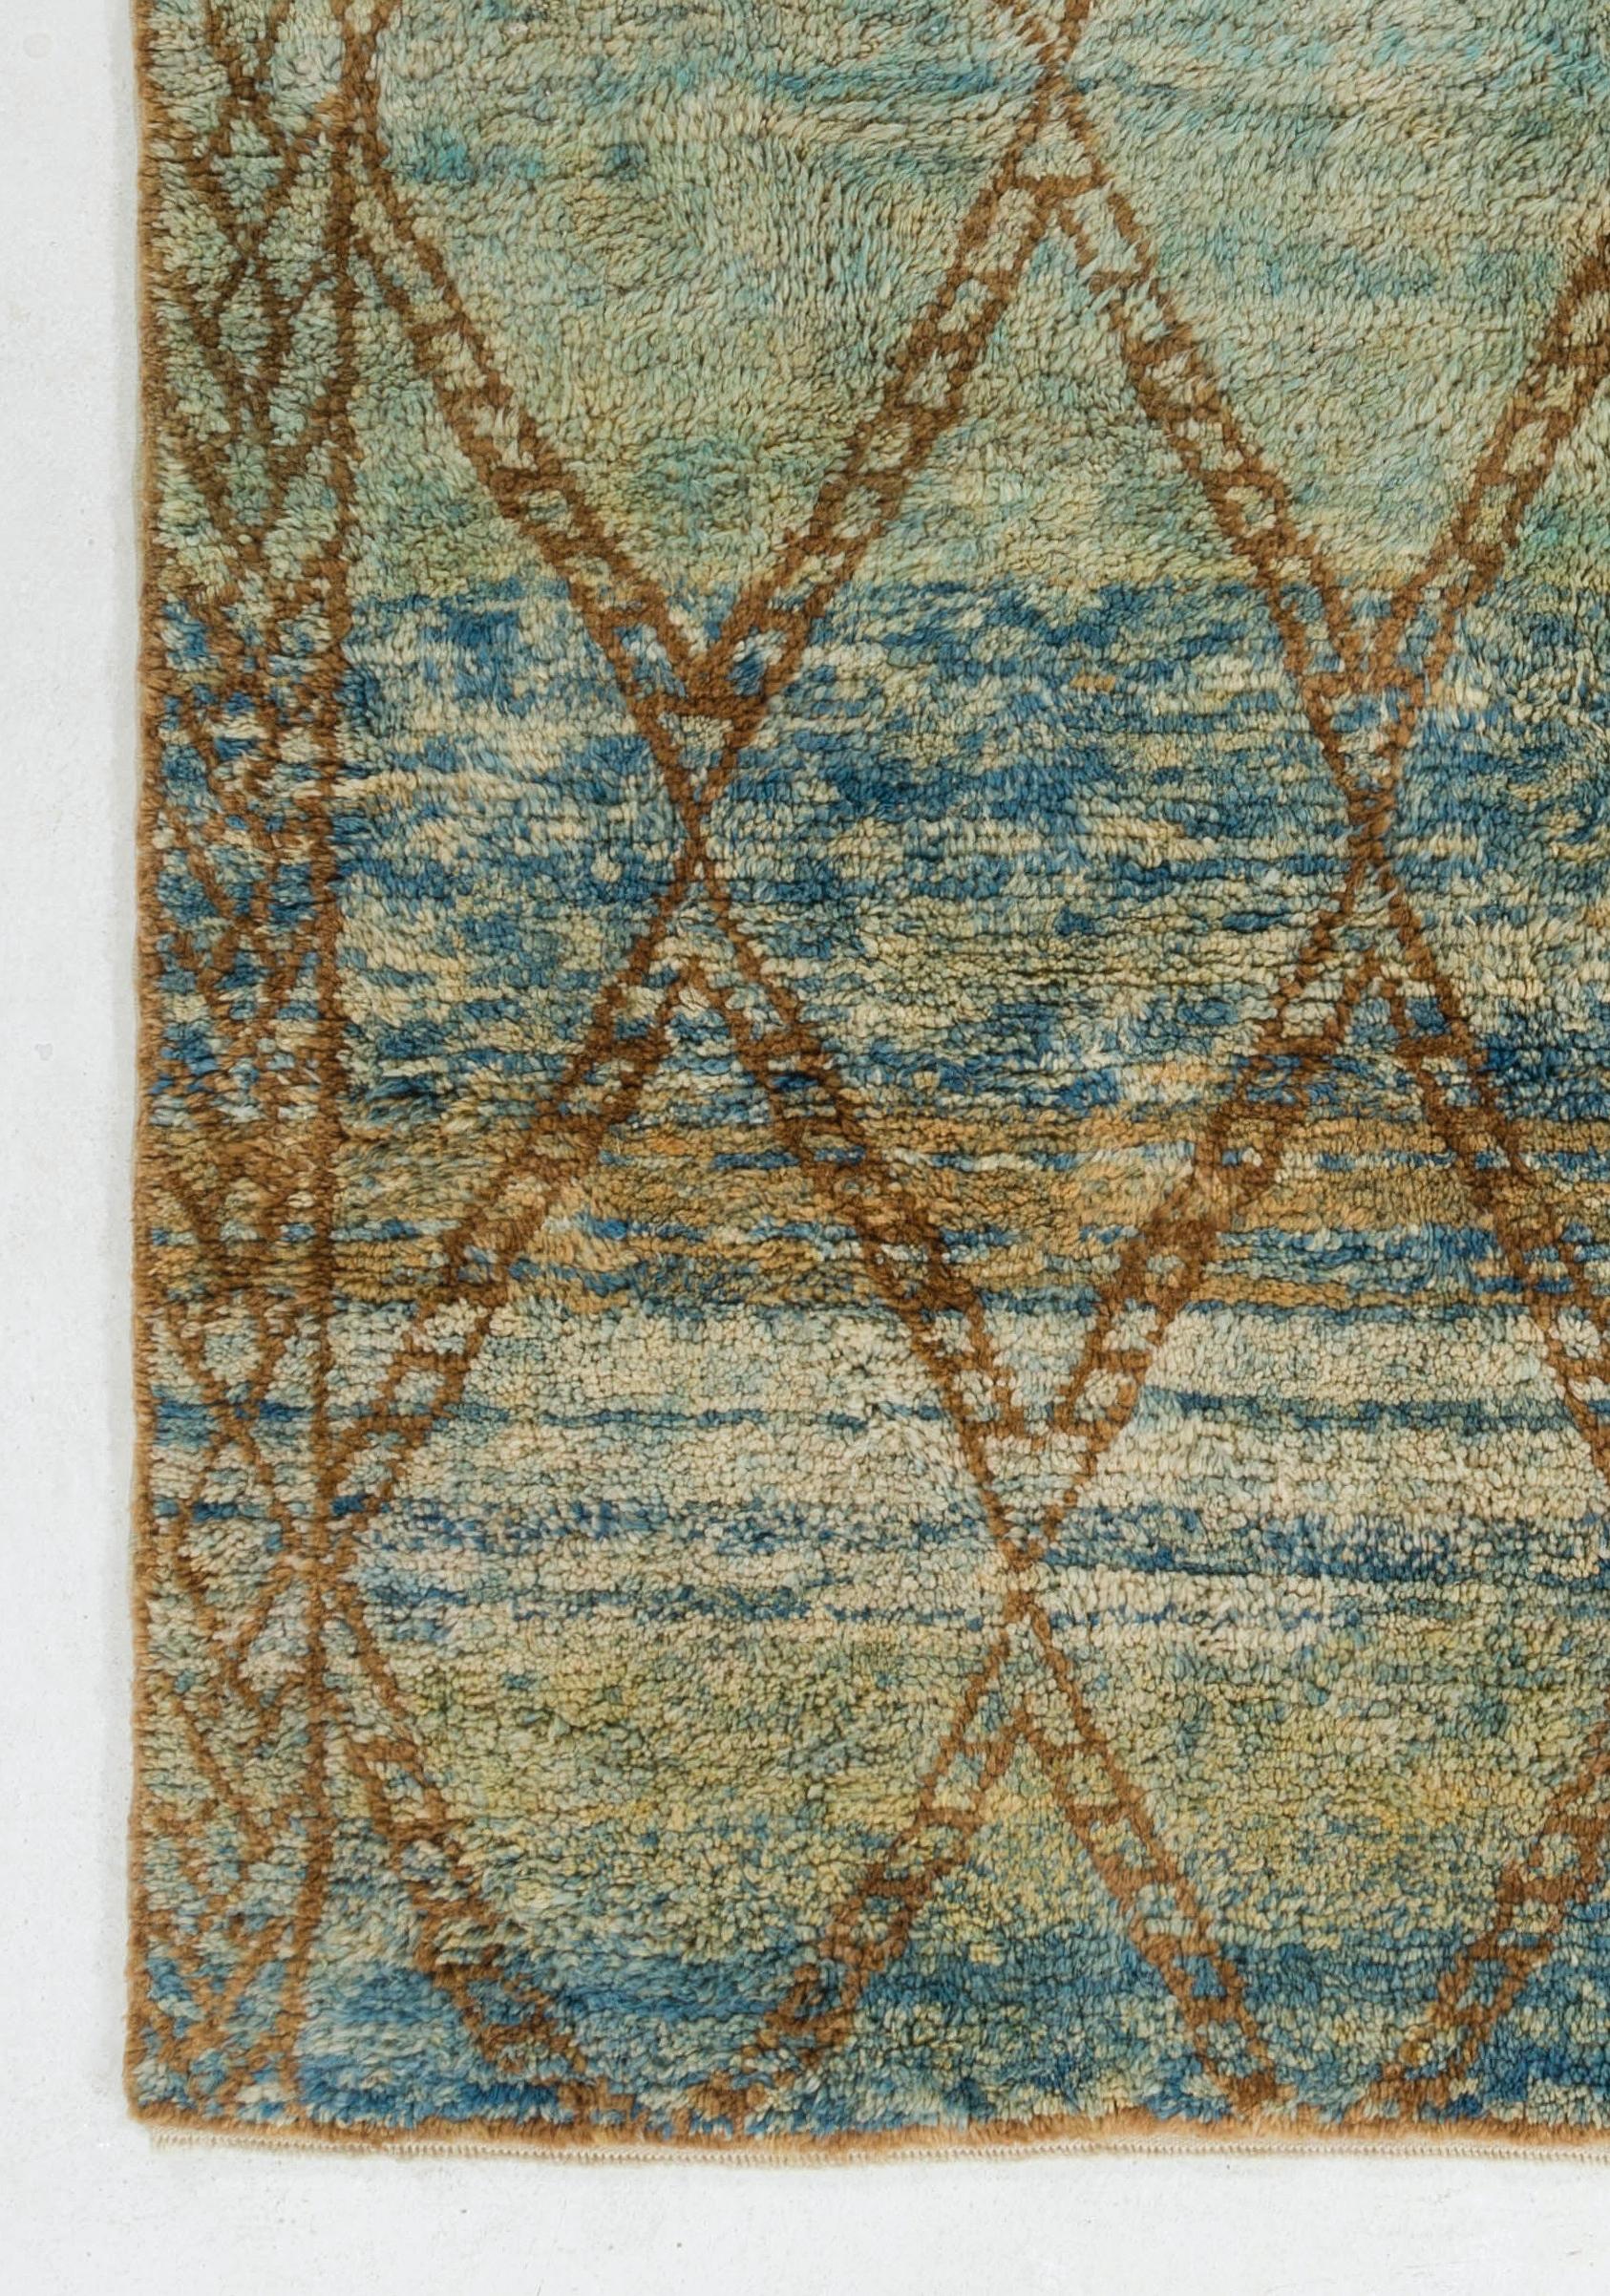 Turkish 7x10 Ft Modern Moroccan Berber Wool Rug. Hand-knotted in Green, Blue & Brown For Sale